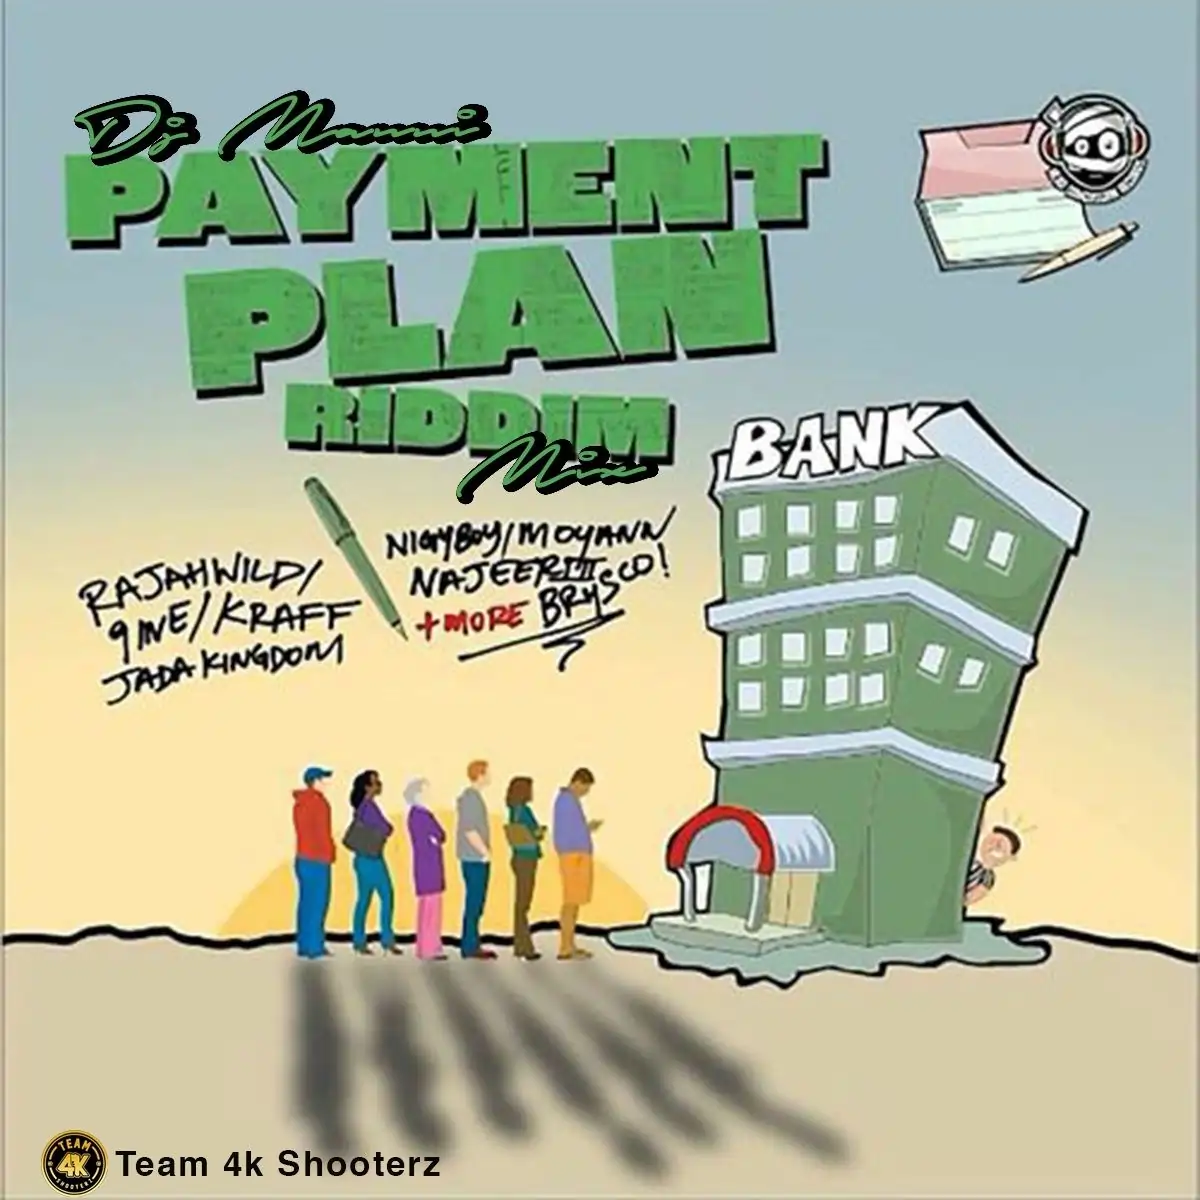 Artwork for "DJ Manni - Payment Plan Riddim Mix". The cartoon image shows a group of people lined up outside a tilted bank building with Event details and performer names (related to the mixtape) are listed.